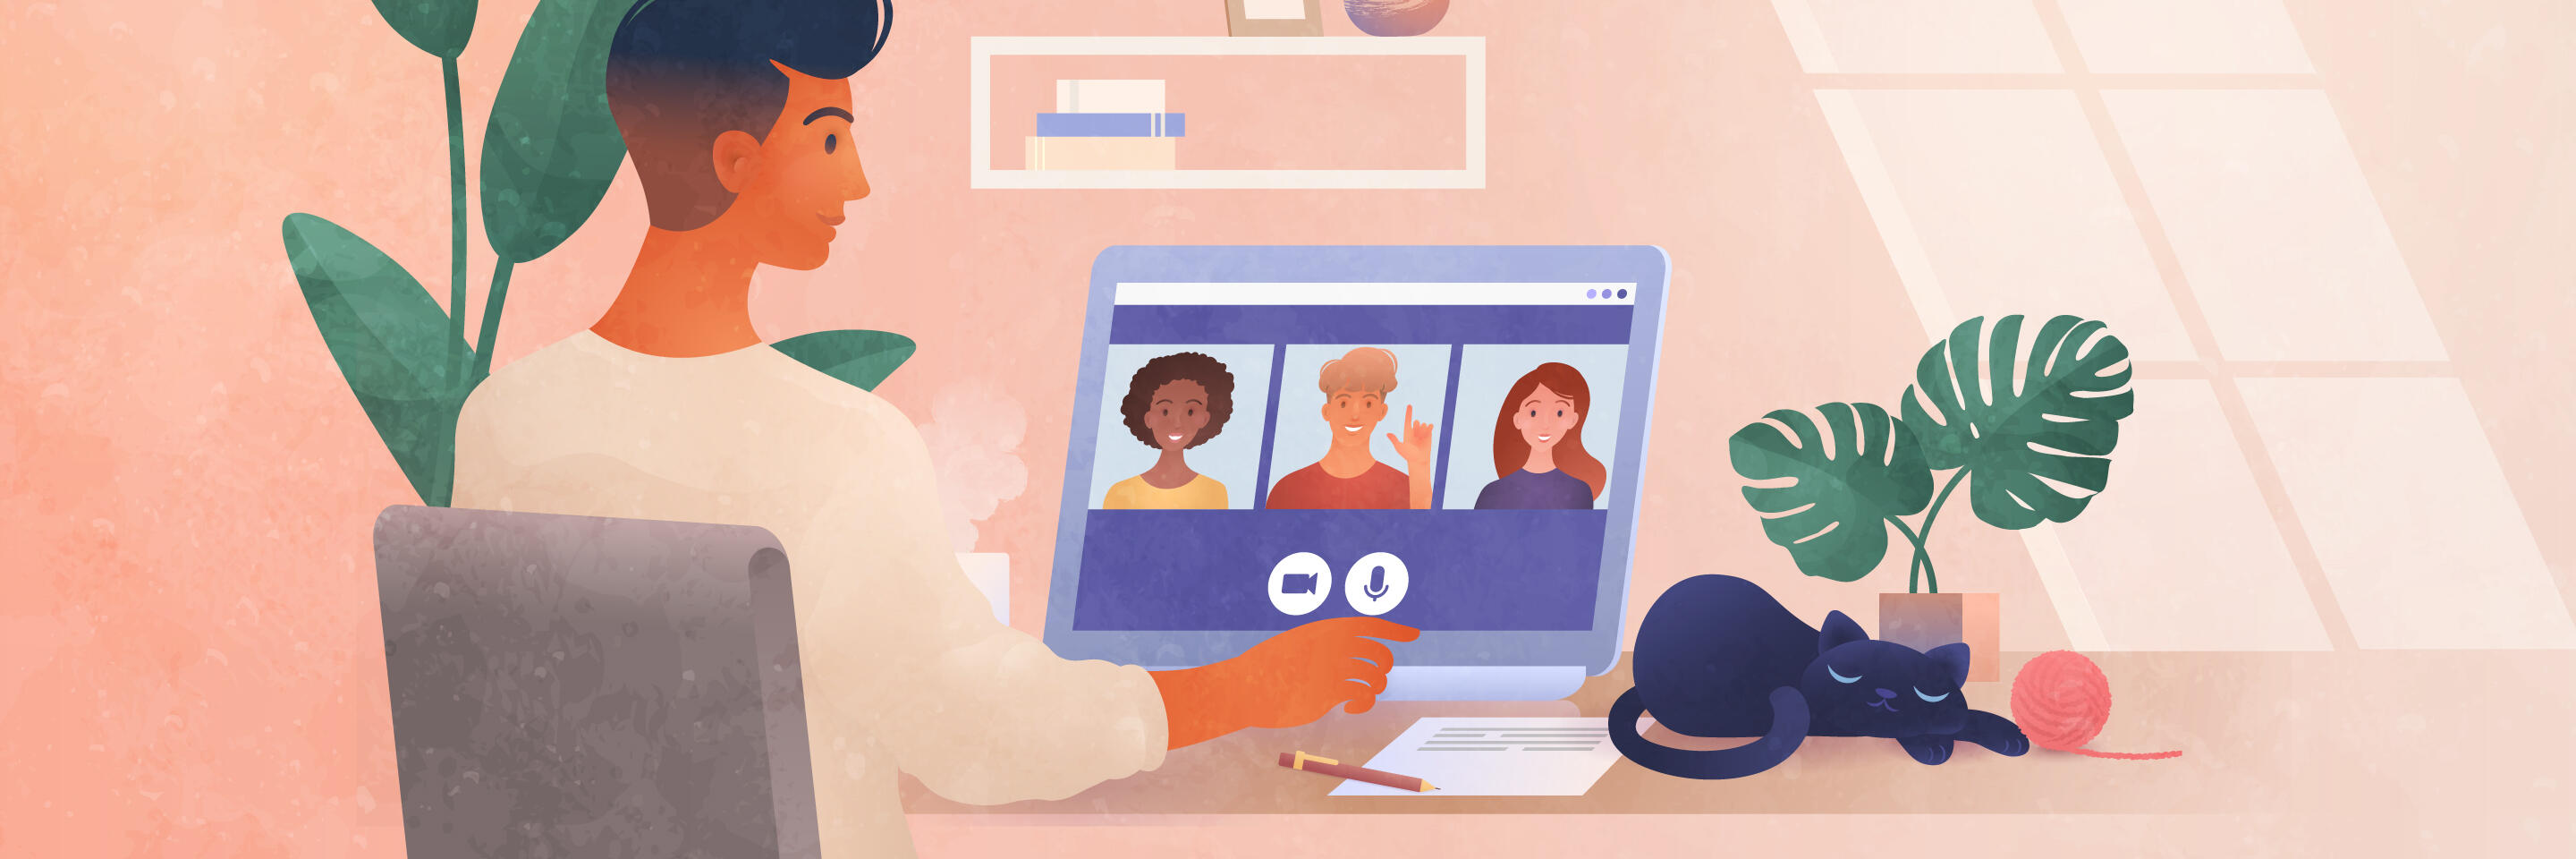 4 tools to help managers connect with remote teams | MIT Sloan